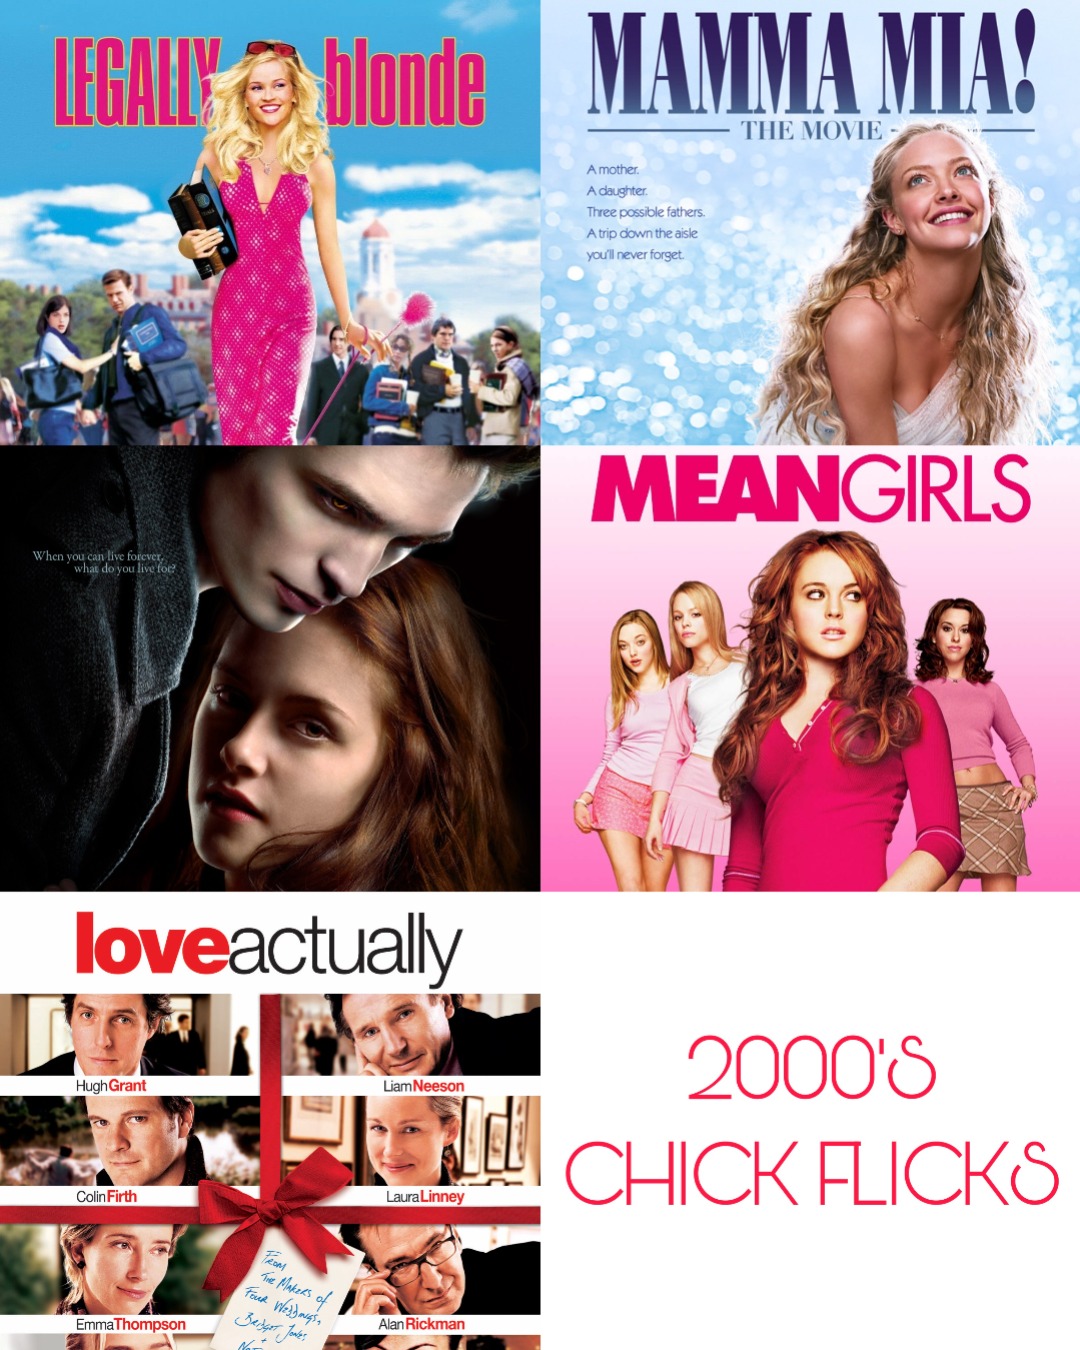 The of 2000's Chick-Flicks – The